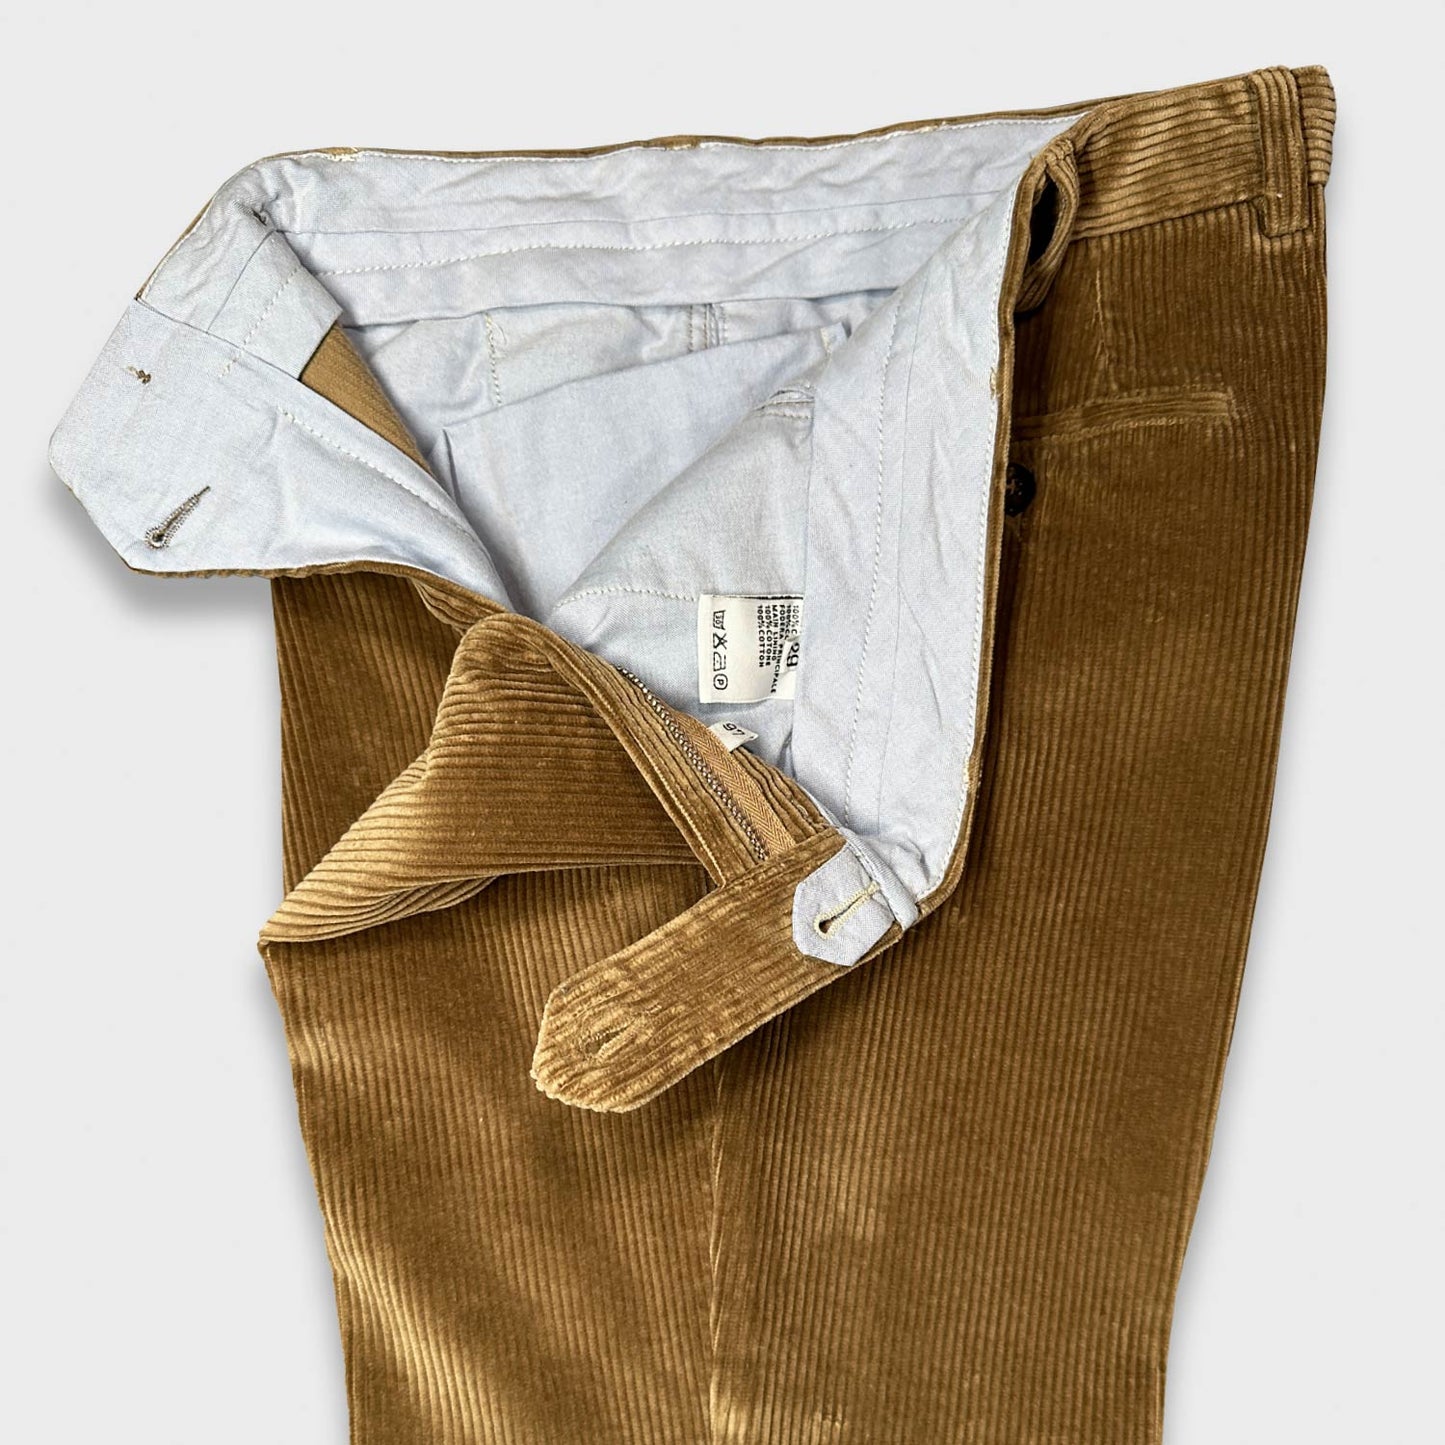 Corduroy | Textured, Ribbed, Wale | Britannica